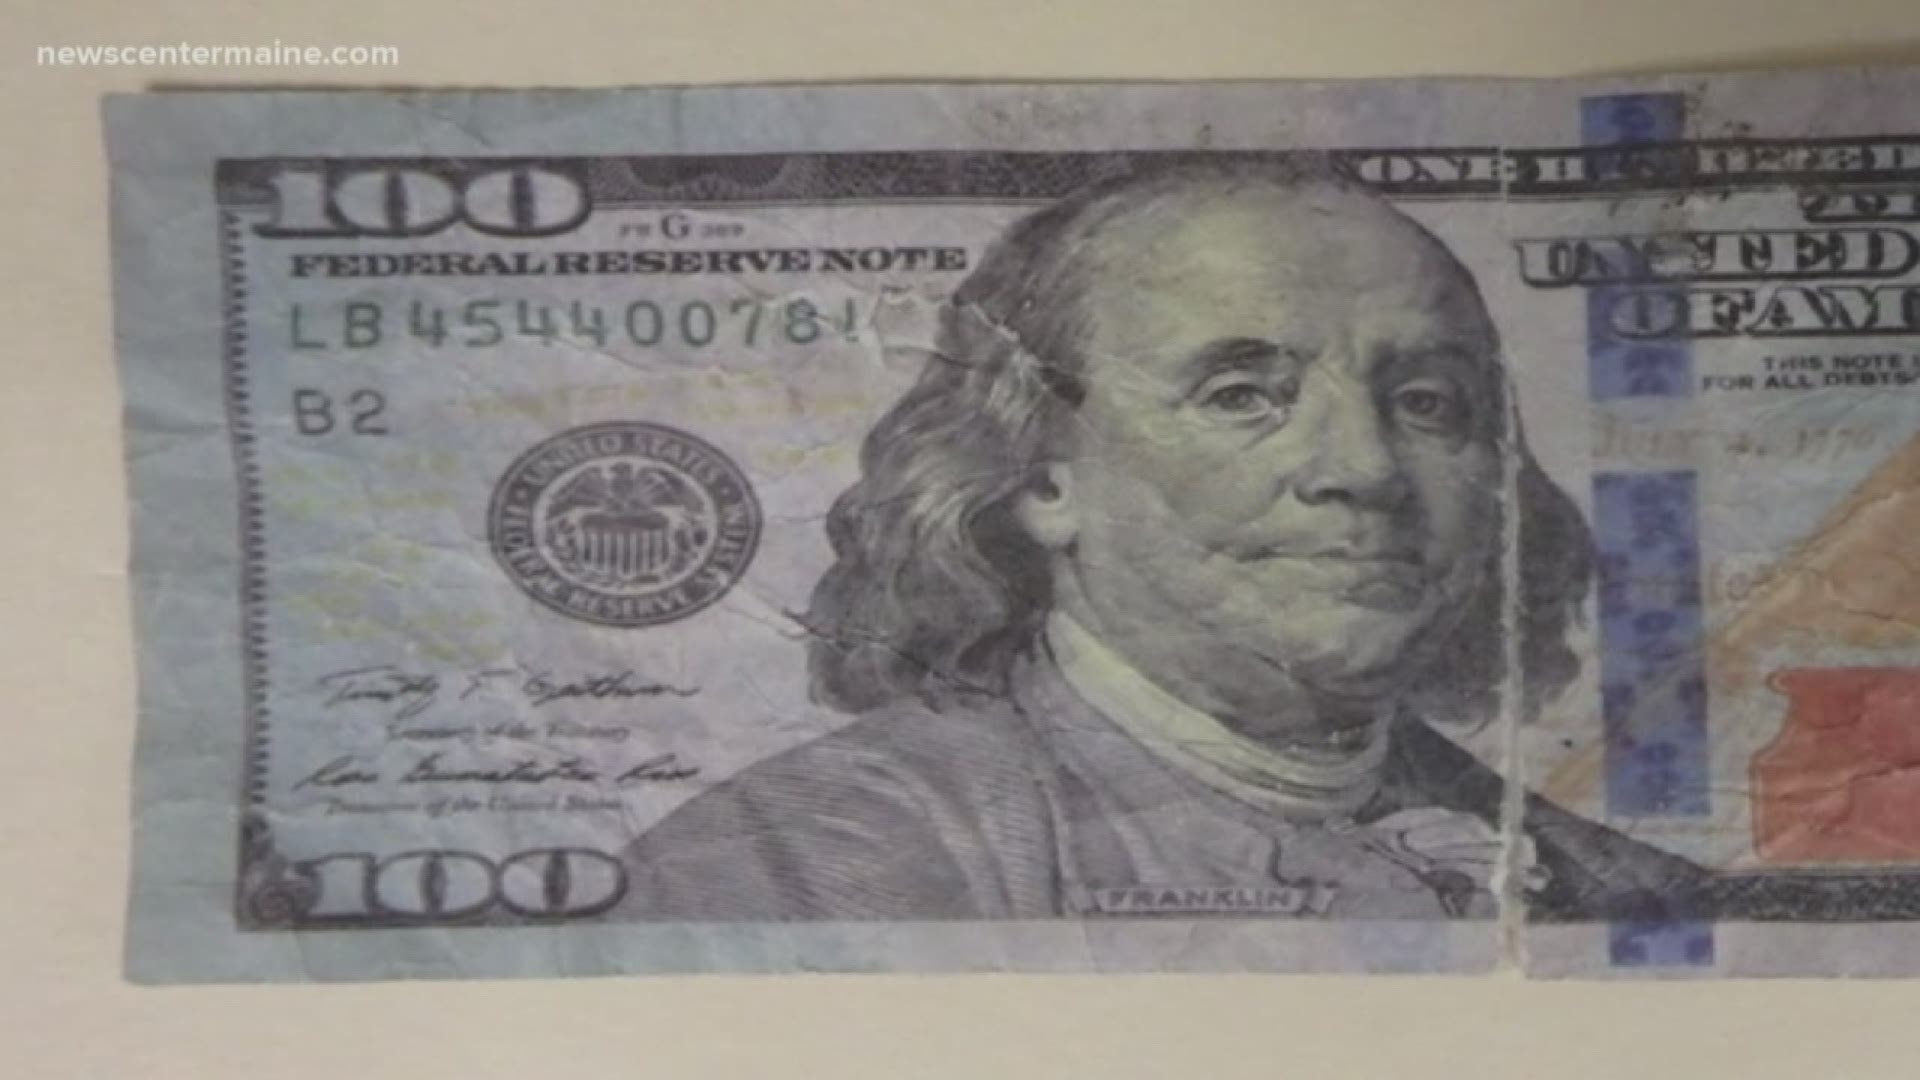 how is counterfeit money detected and how long does it take to tell if a bill is fake